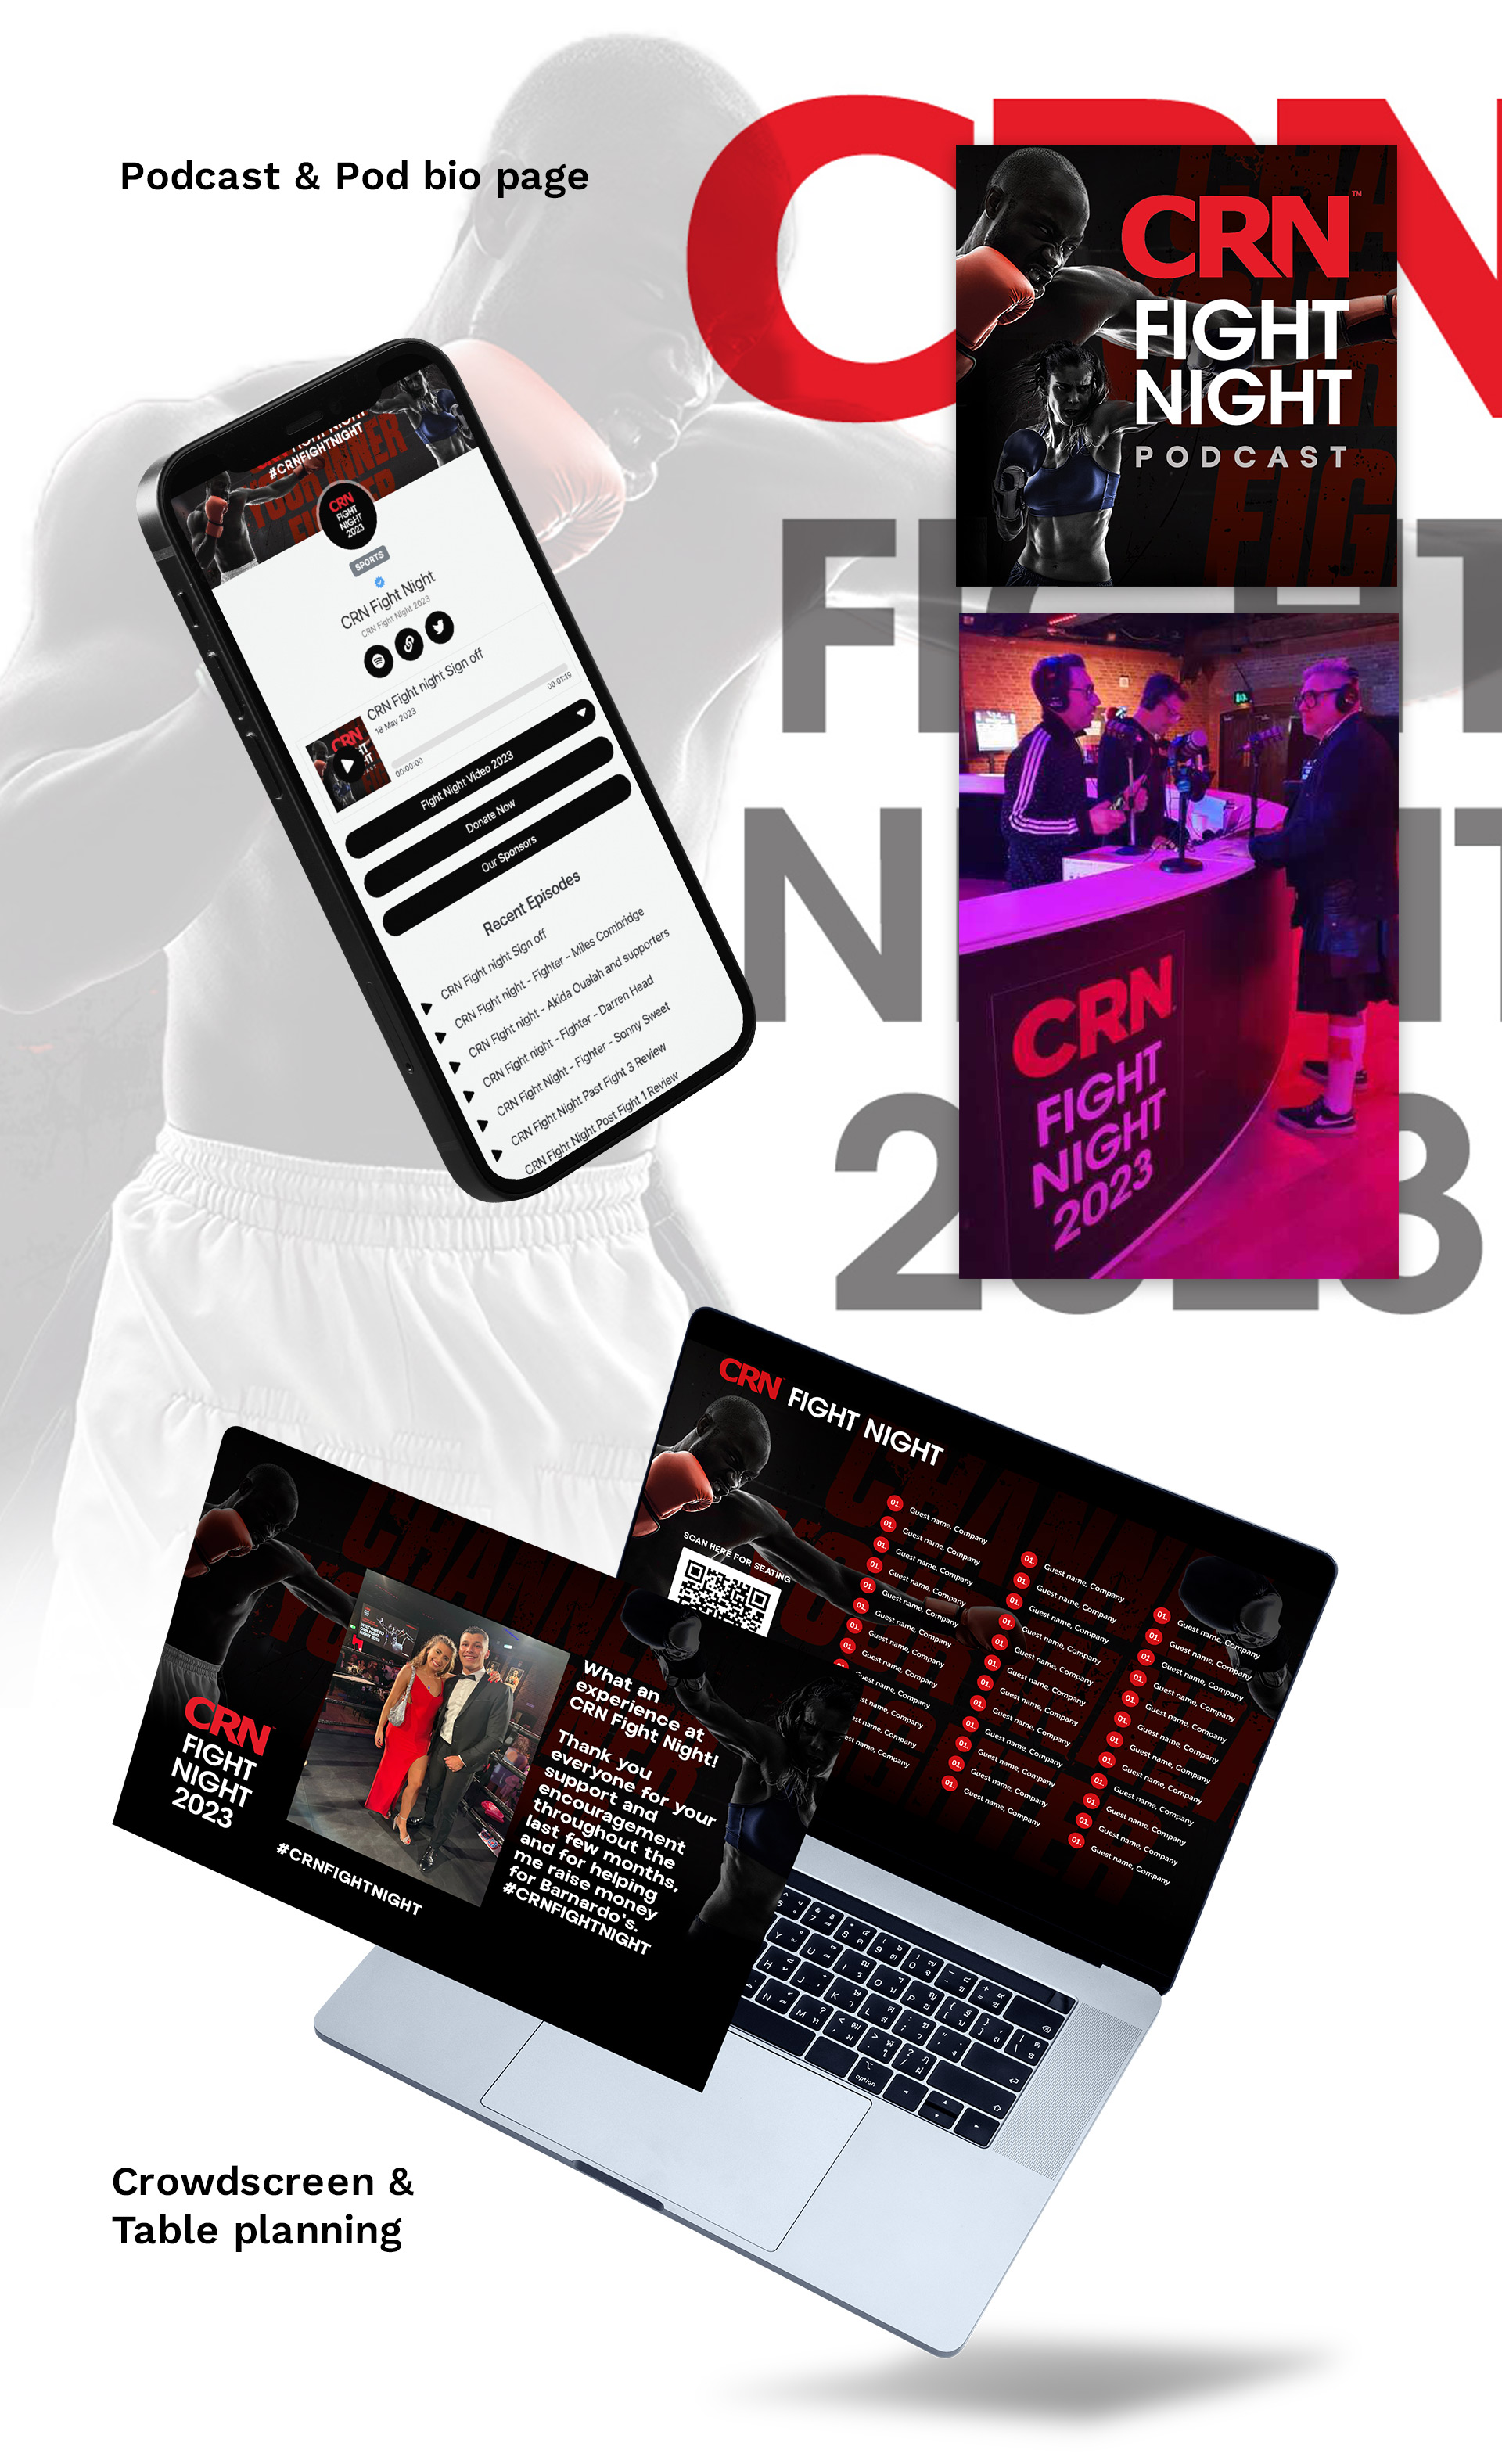 Work for CRN, podcast & social wall